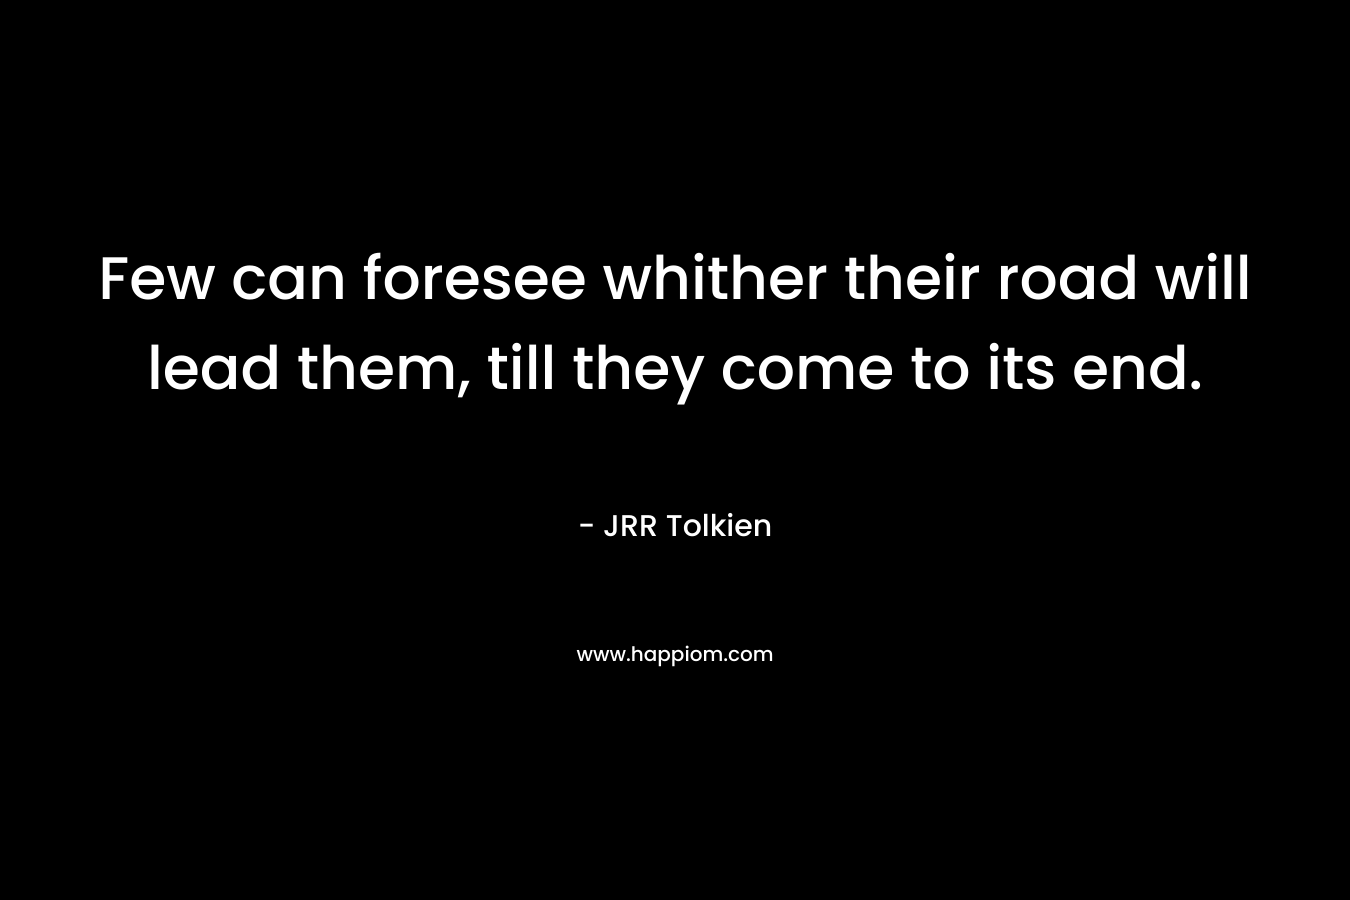 Few can foresee whither their road will lead them, till they come to its end. – JRR Tolkien